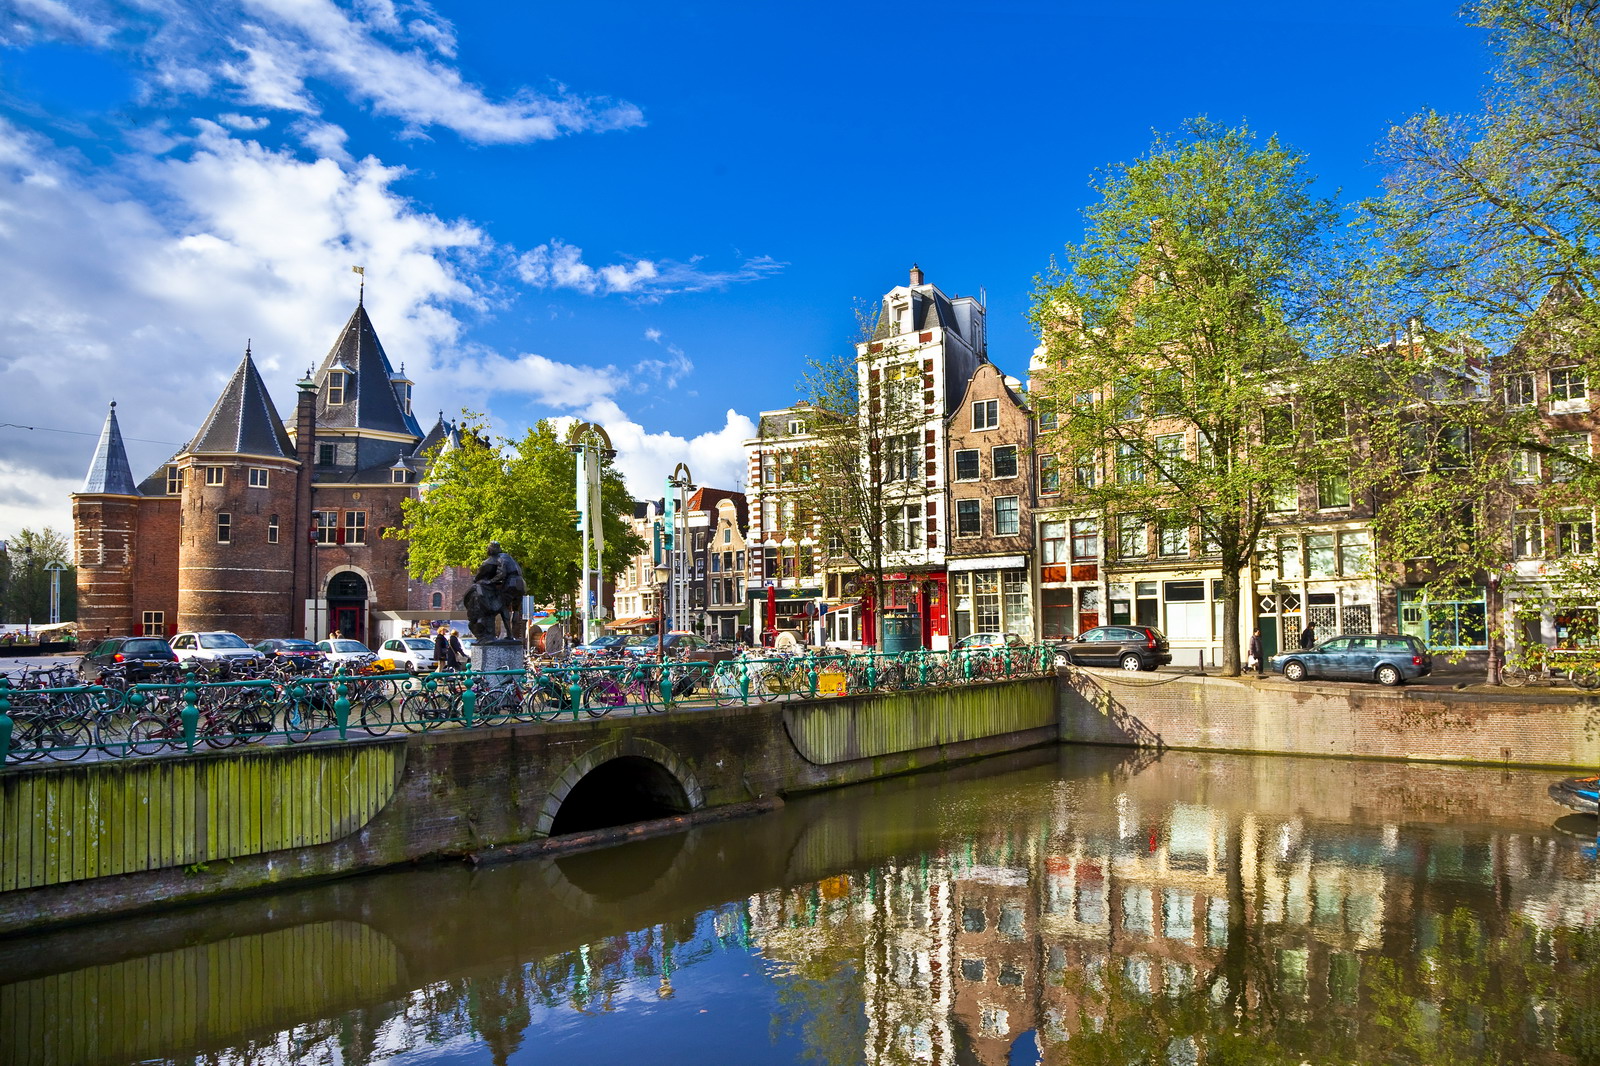 New Bruges & Amsterdam Crystal Cruise goes off the beaten track